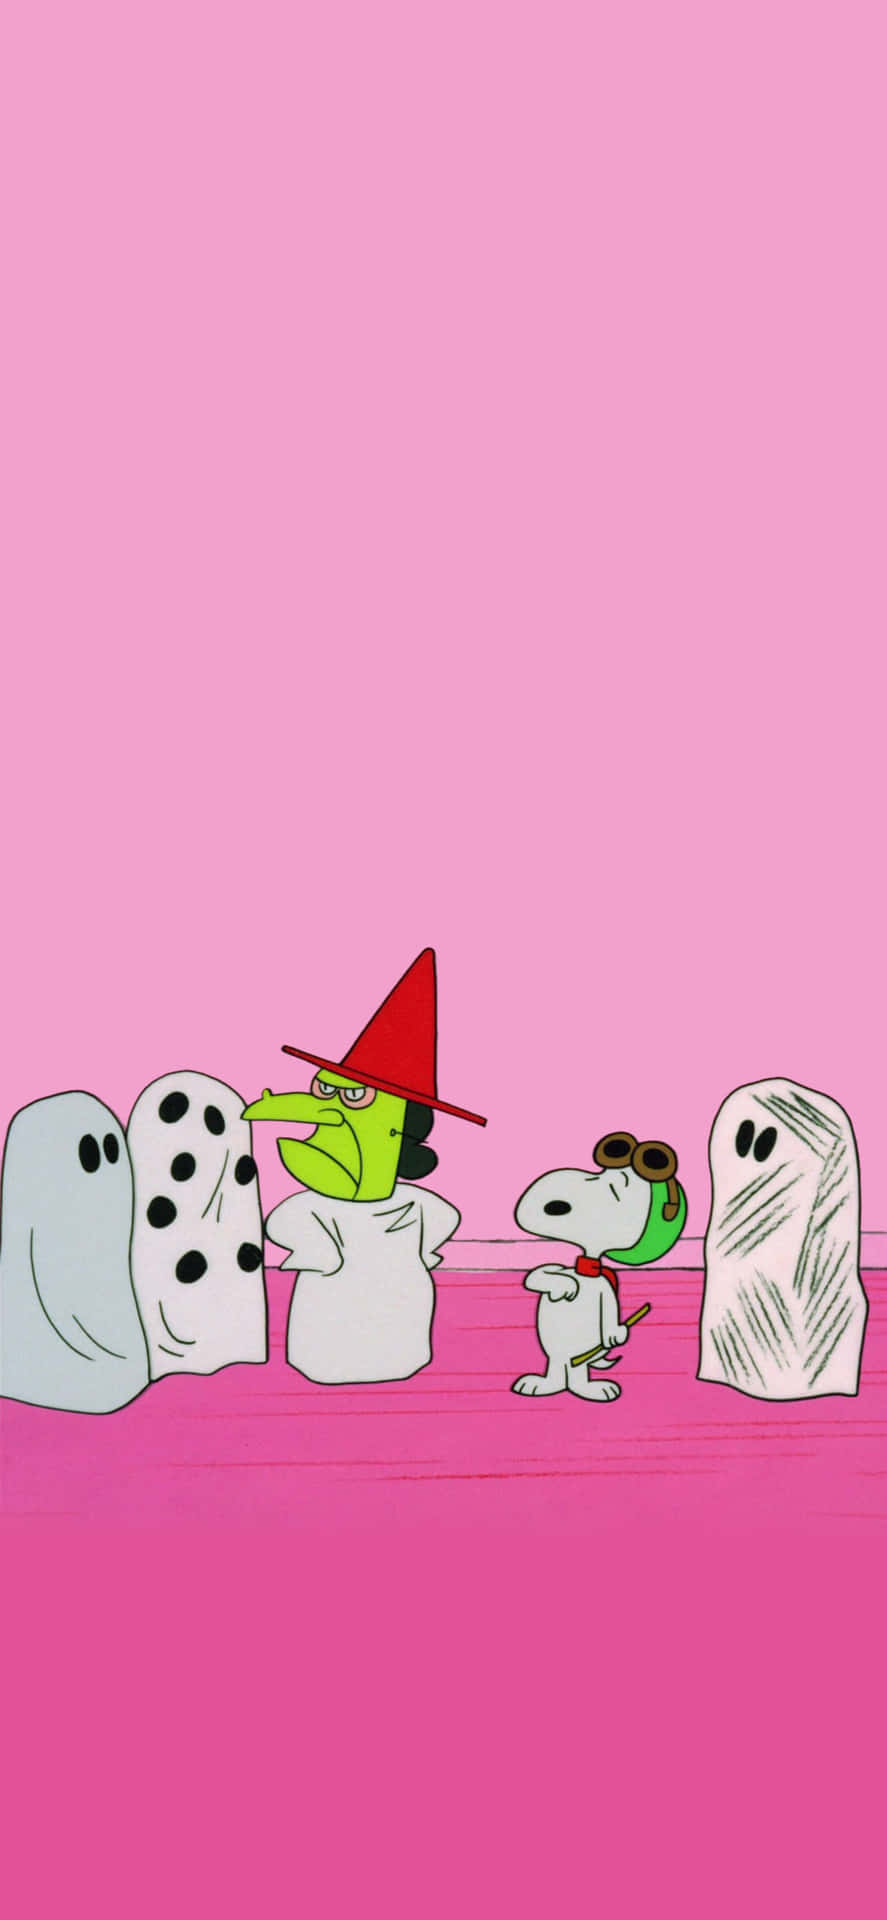 Celebrate Halloween with Peanuts! Wallpaper